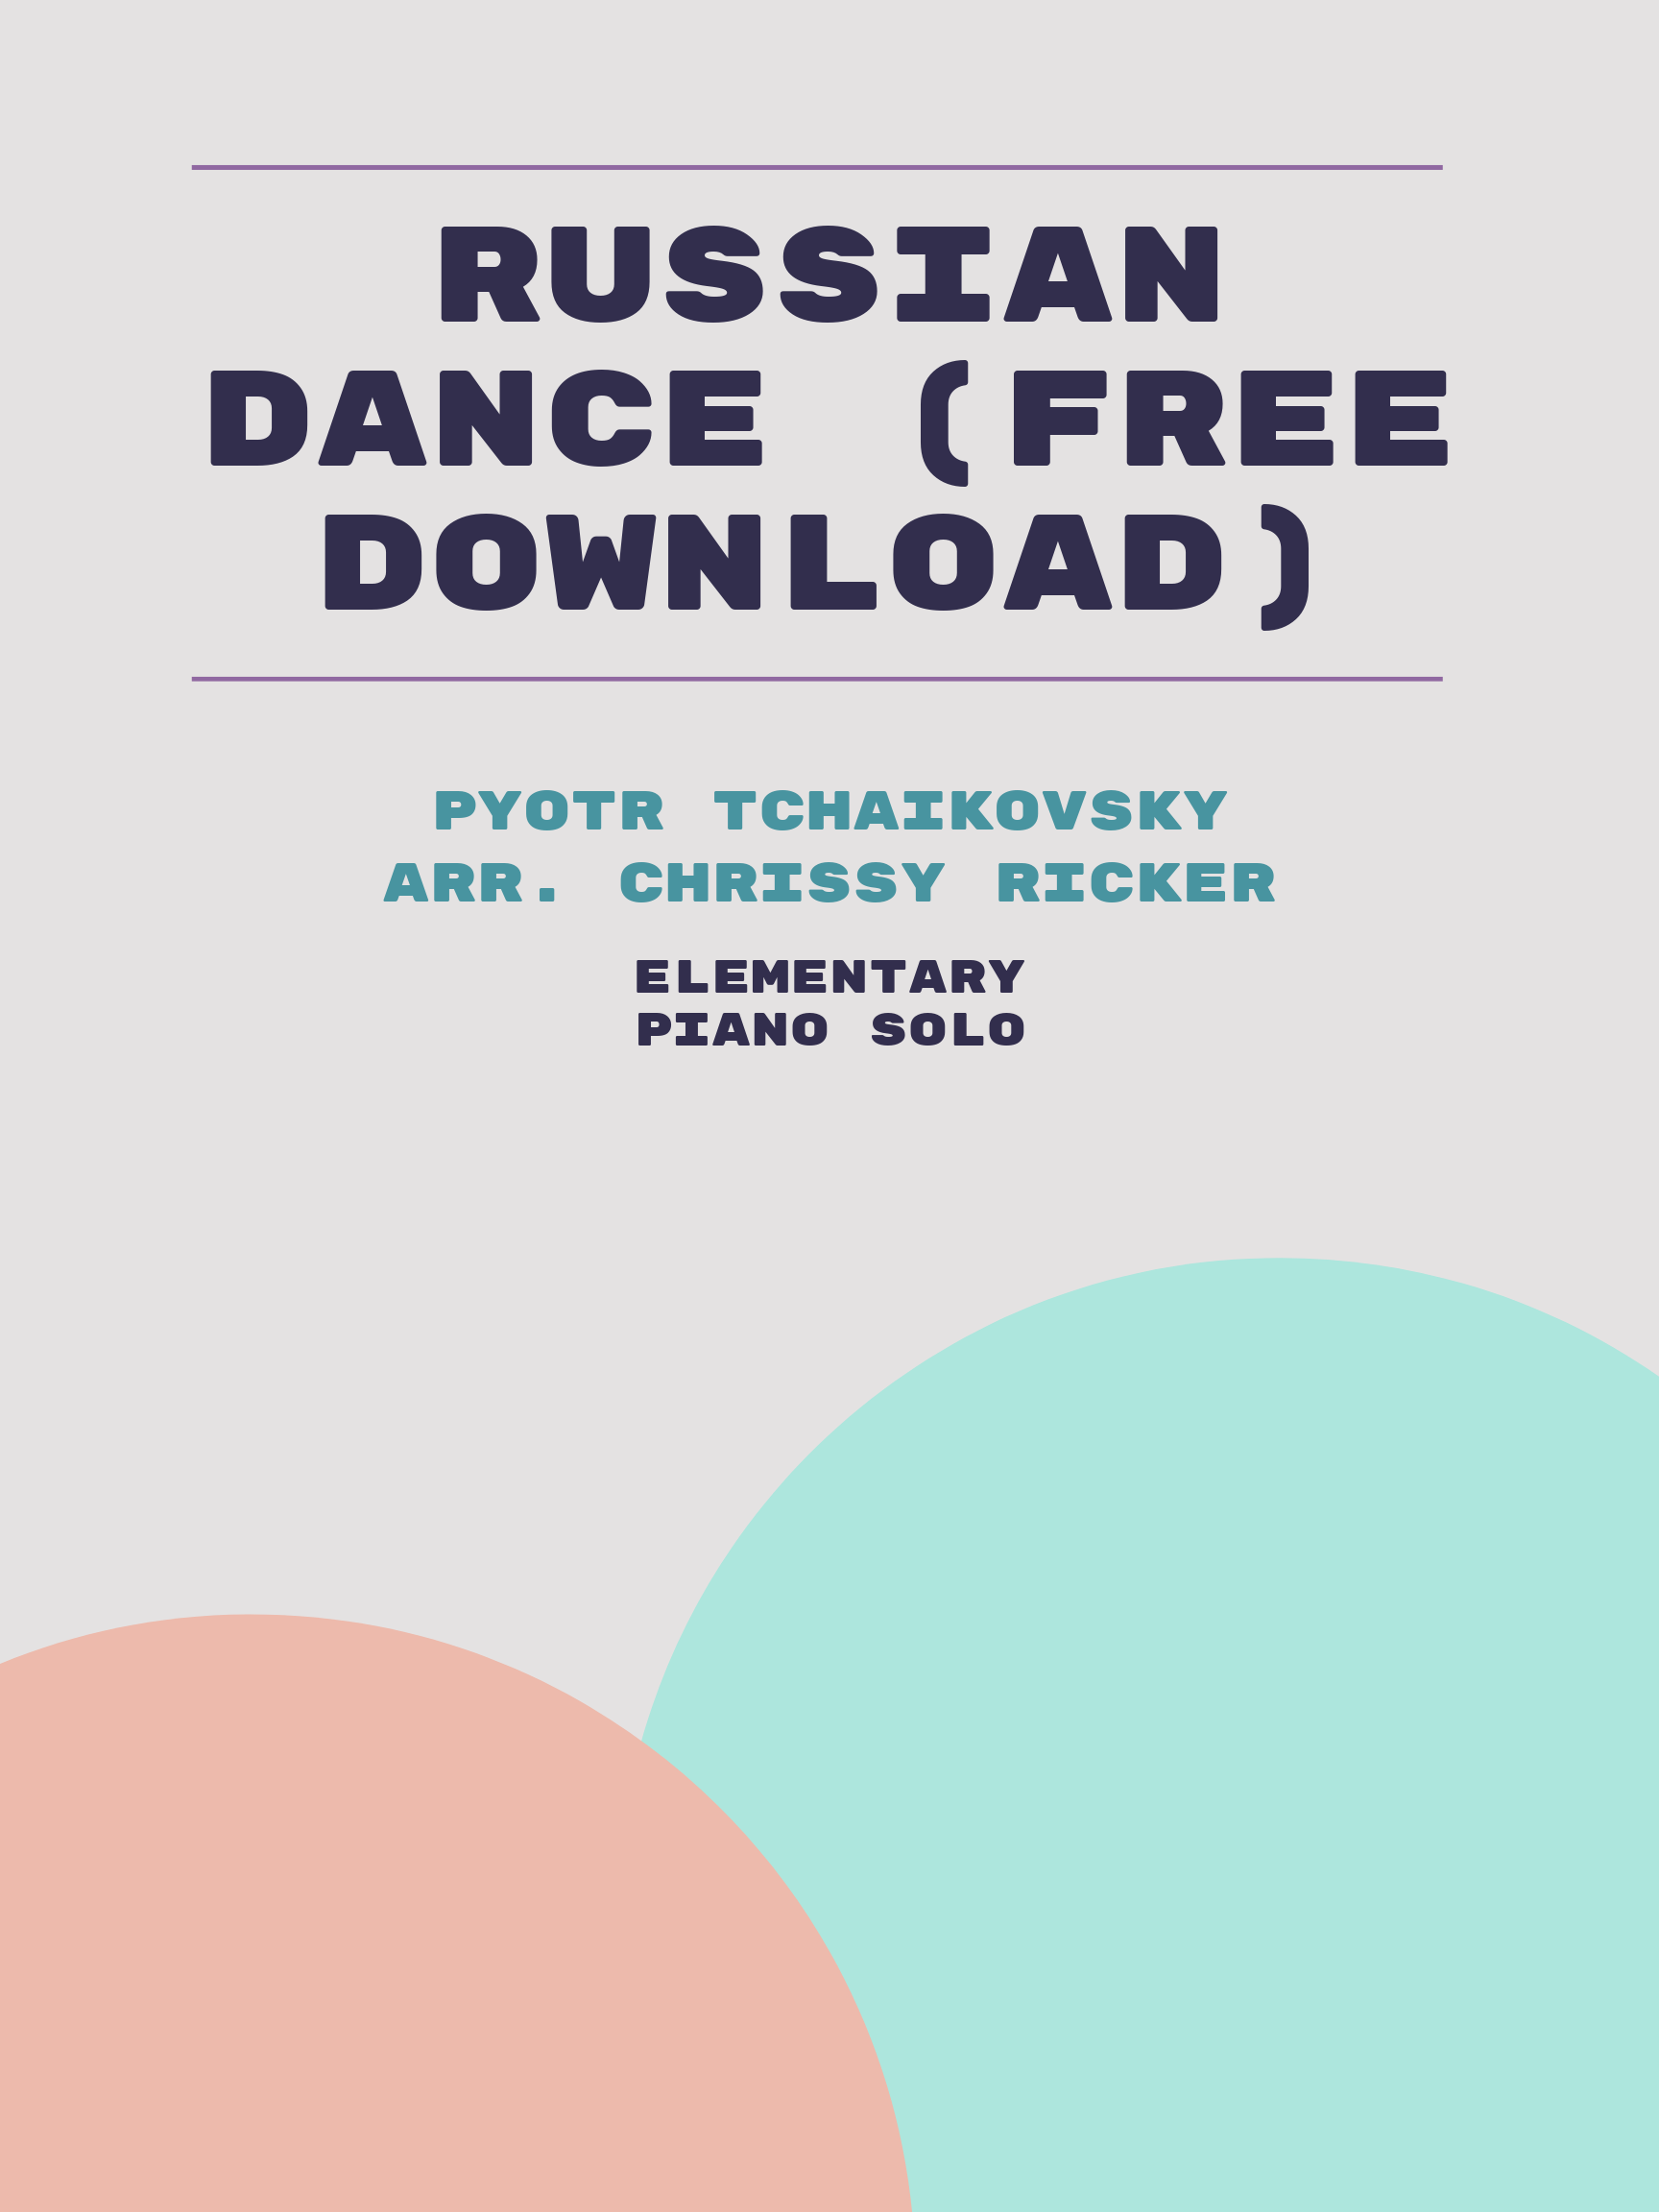 Russian Dance (free download) by Pyotr Tchaikovsky